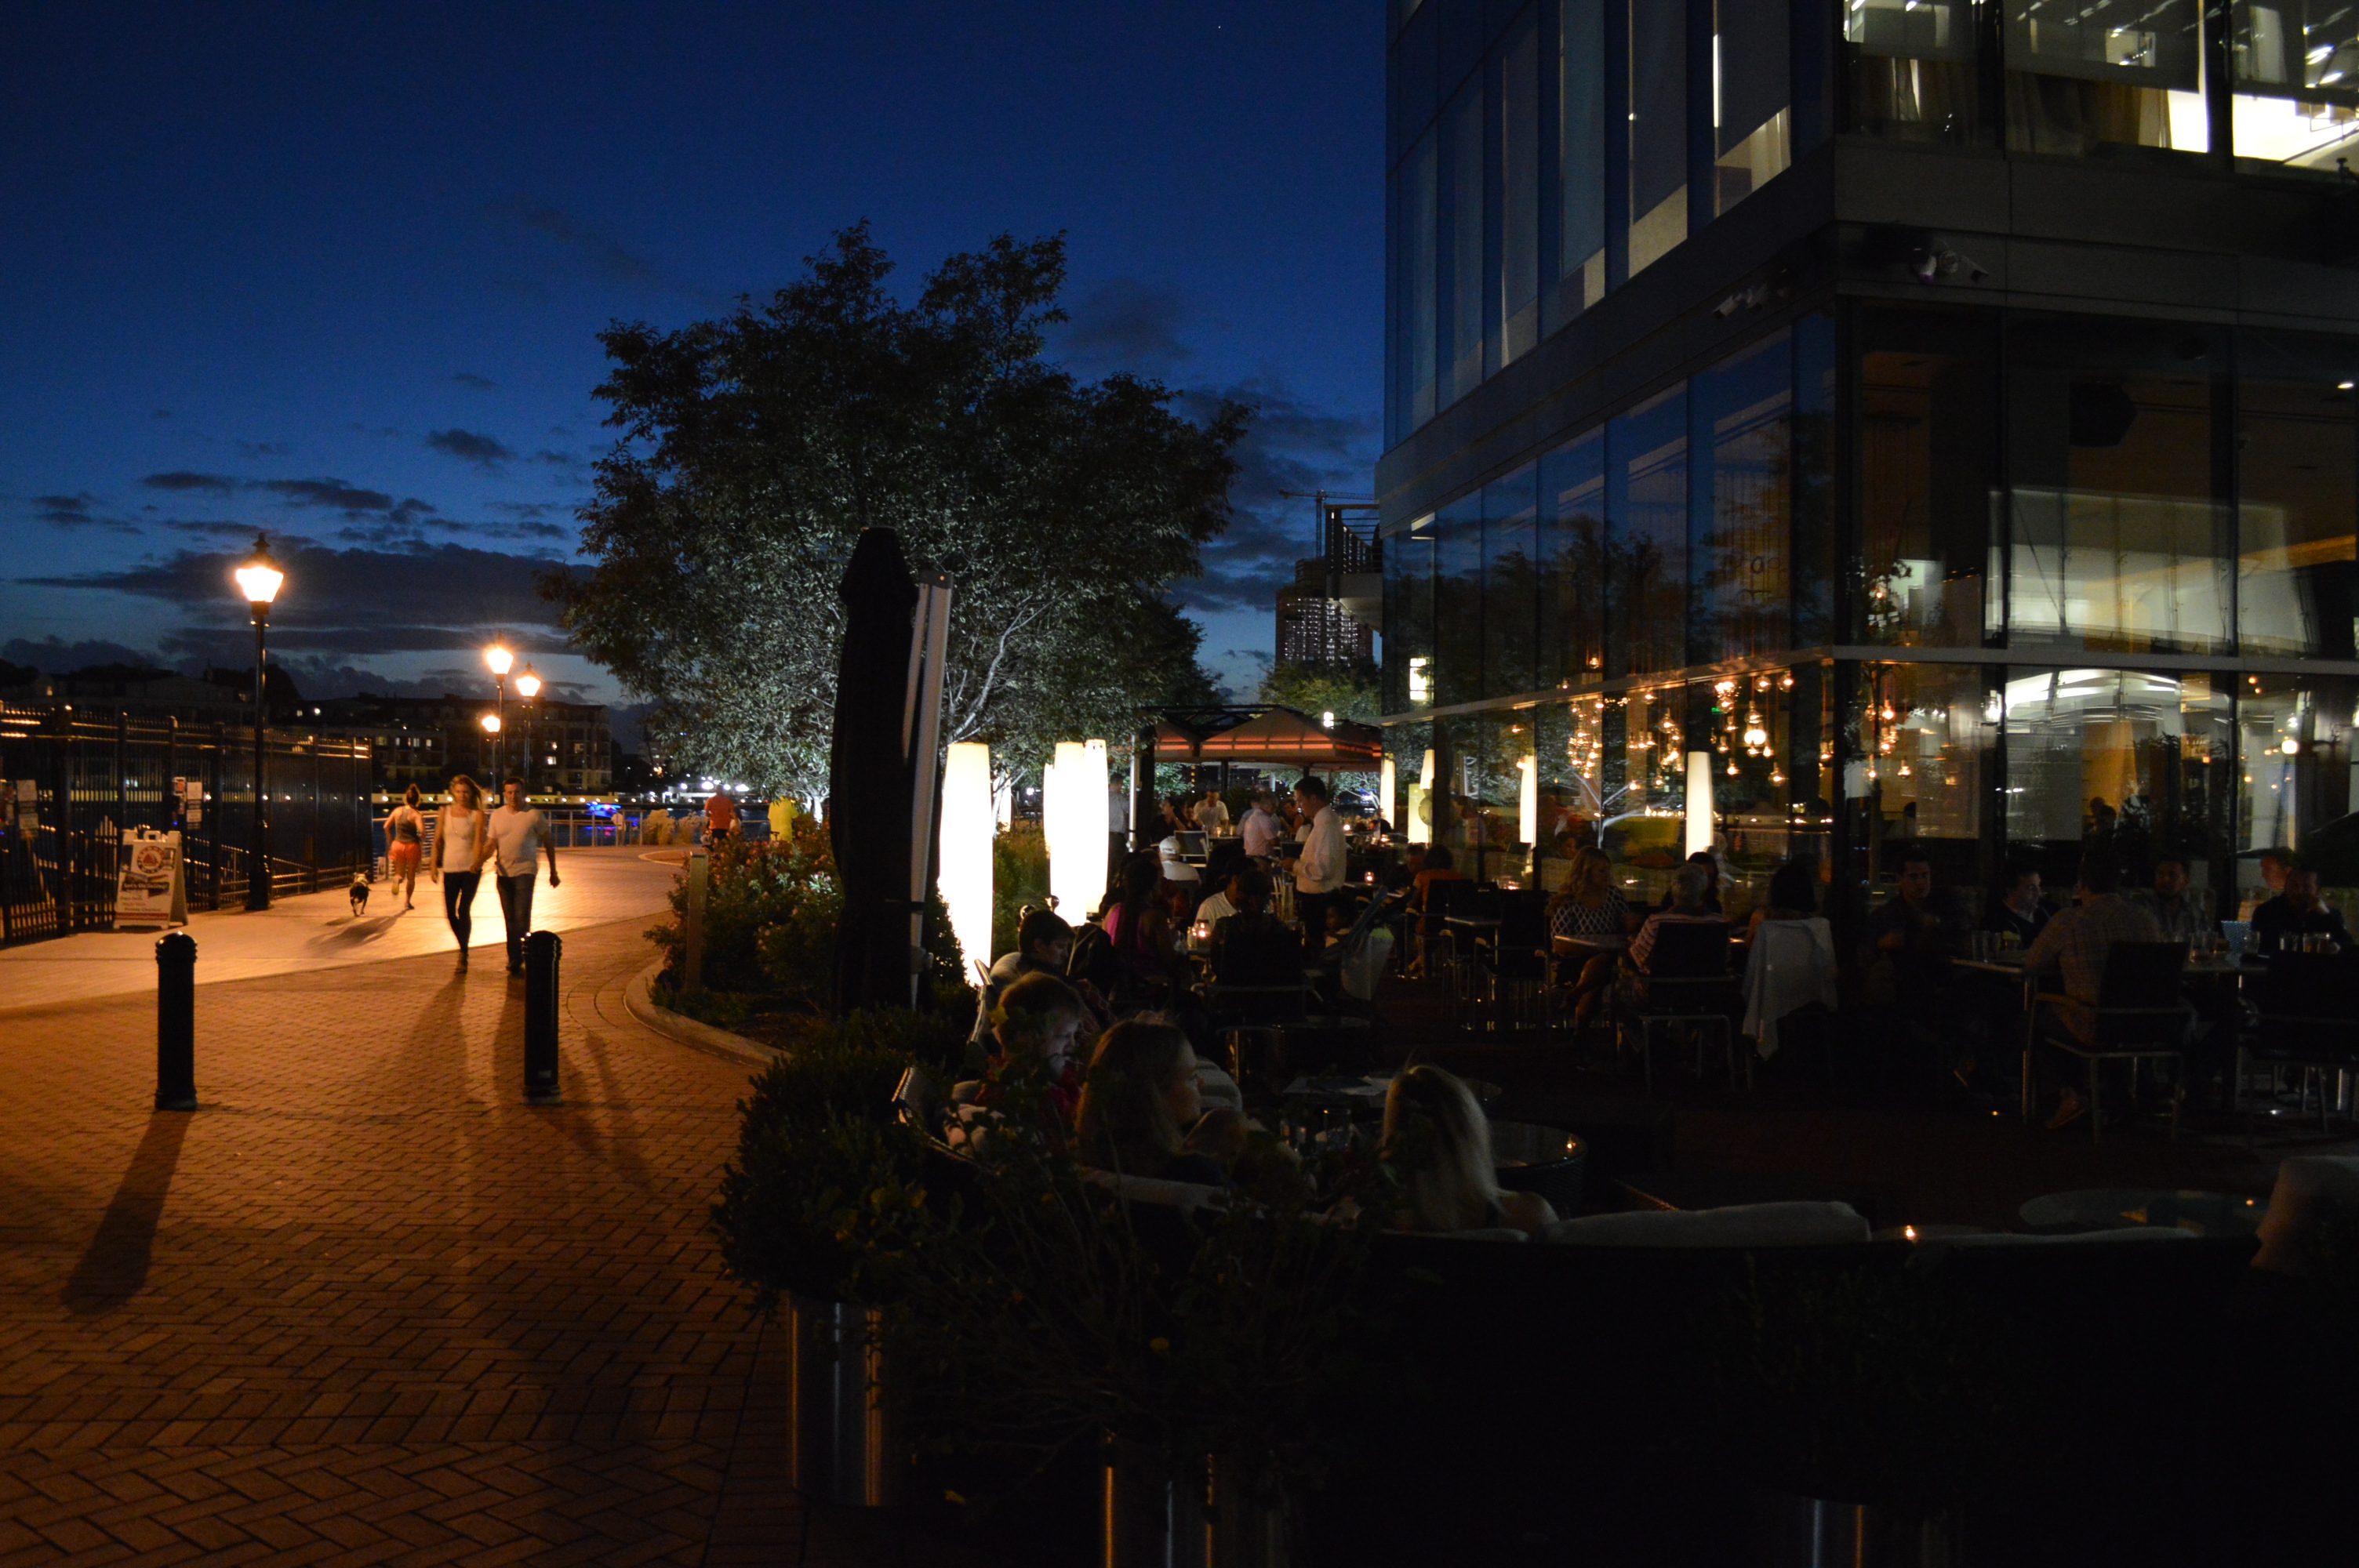 Loch Bar diners make merry on a warm summer evening in Harbor East in Baltimore, MD. (Anthony C. Hayes)